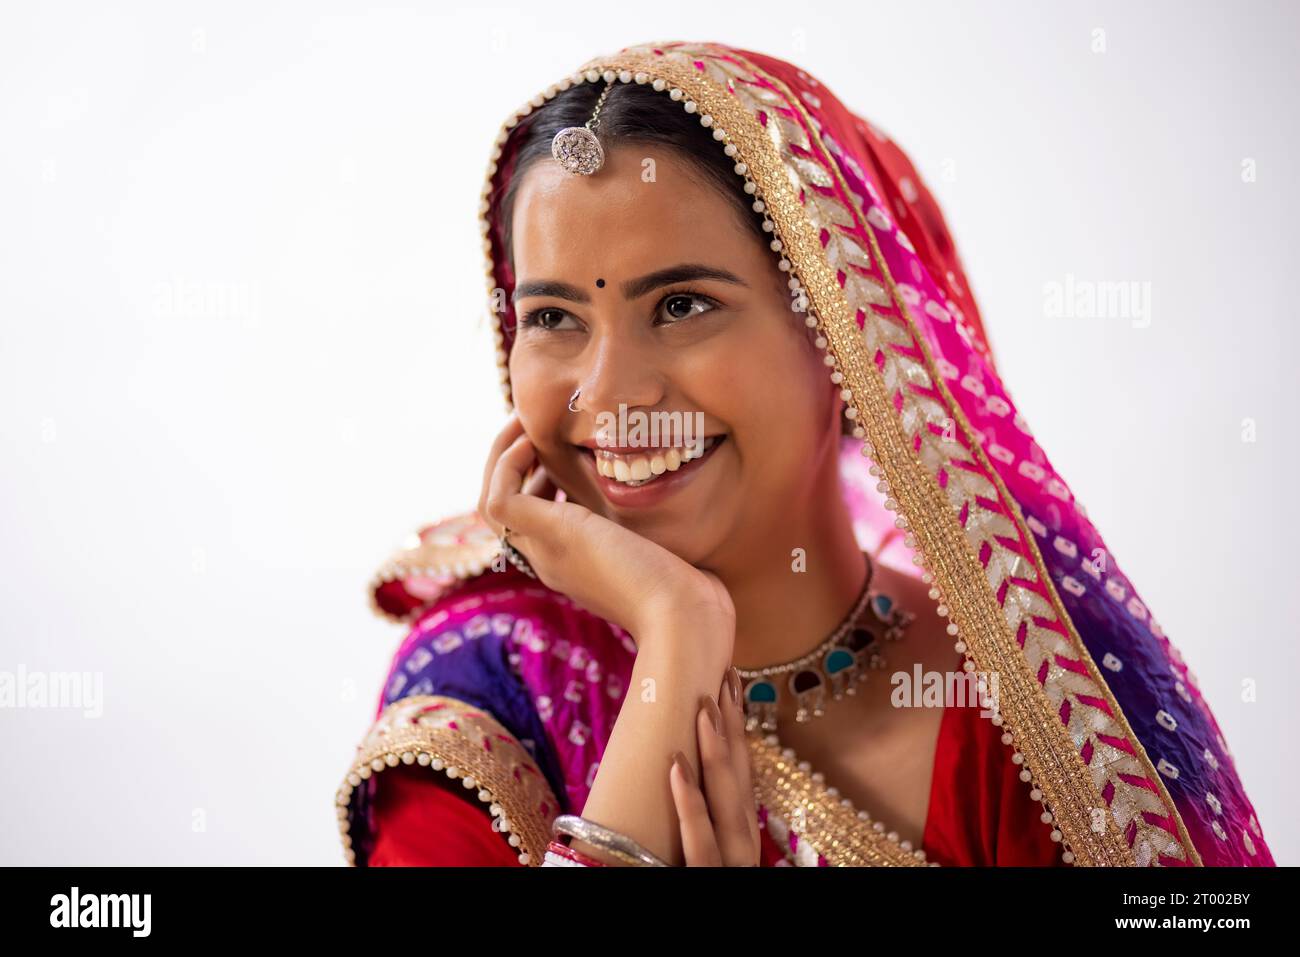 Close-up portrait of a smiling Rajasthani young woman with hand on cheek against white background Stock Photo